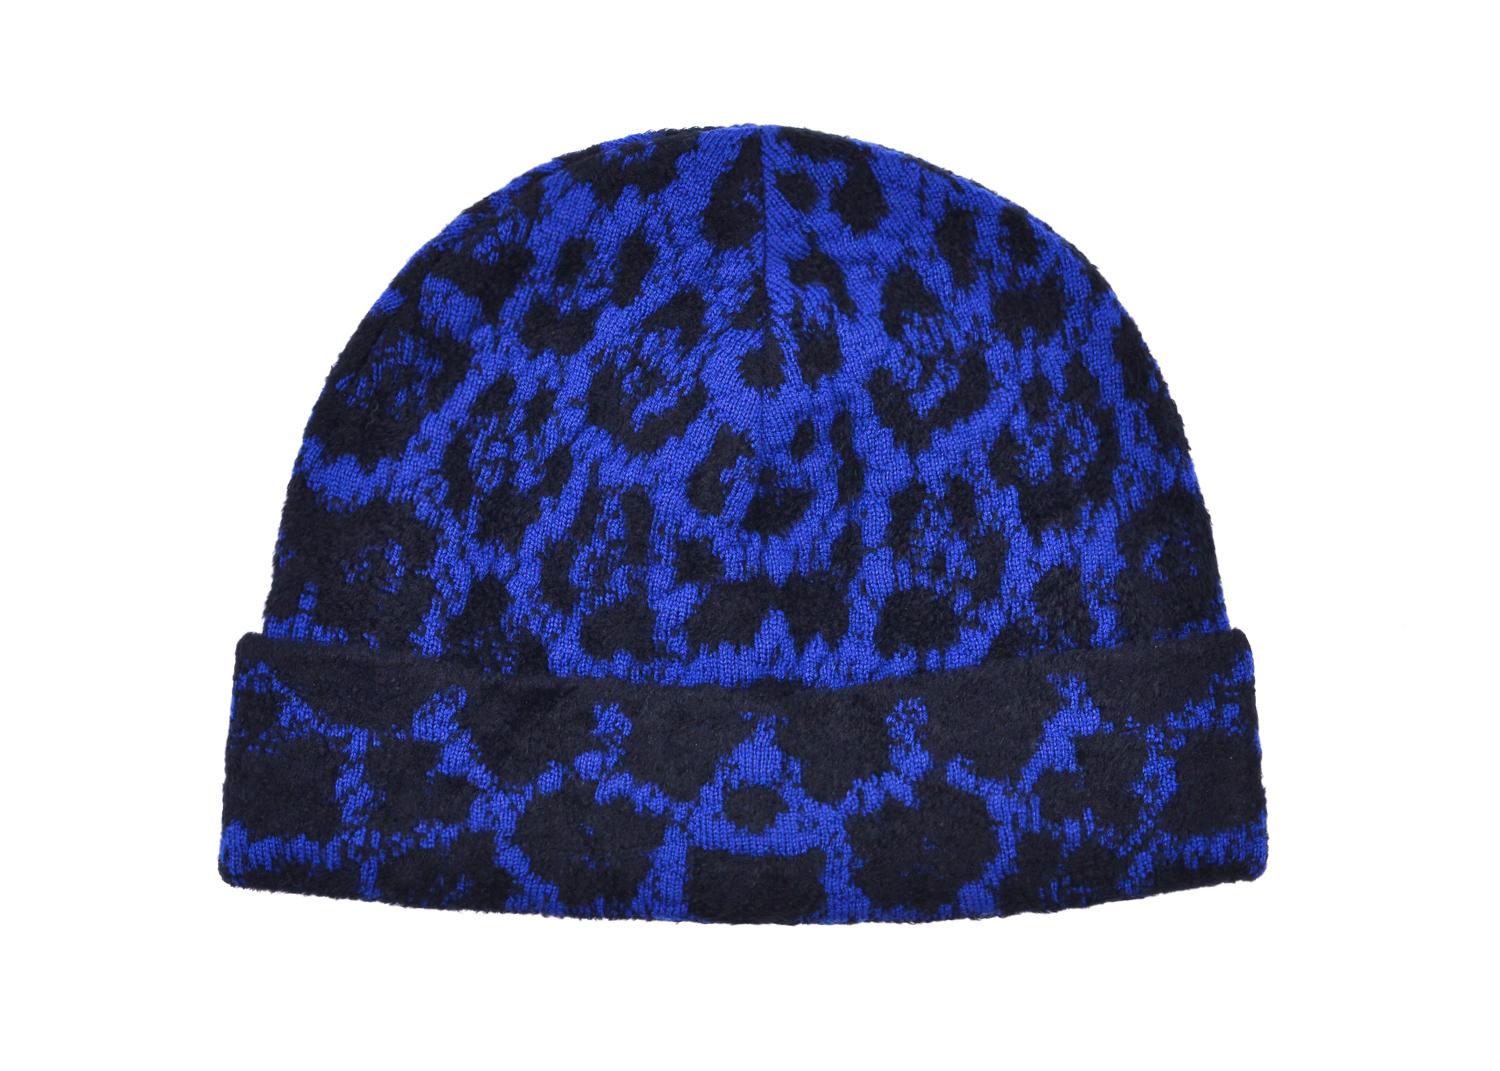 Roberto Cavalli redefines classic print infusion with this wool blend masterpiece. This deep electric blue and black hat features black multi woven cheetah print, a knitted electric blue base, and modern cuff base. You can slip this over your head